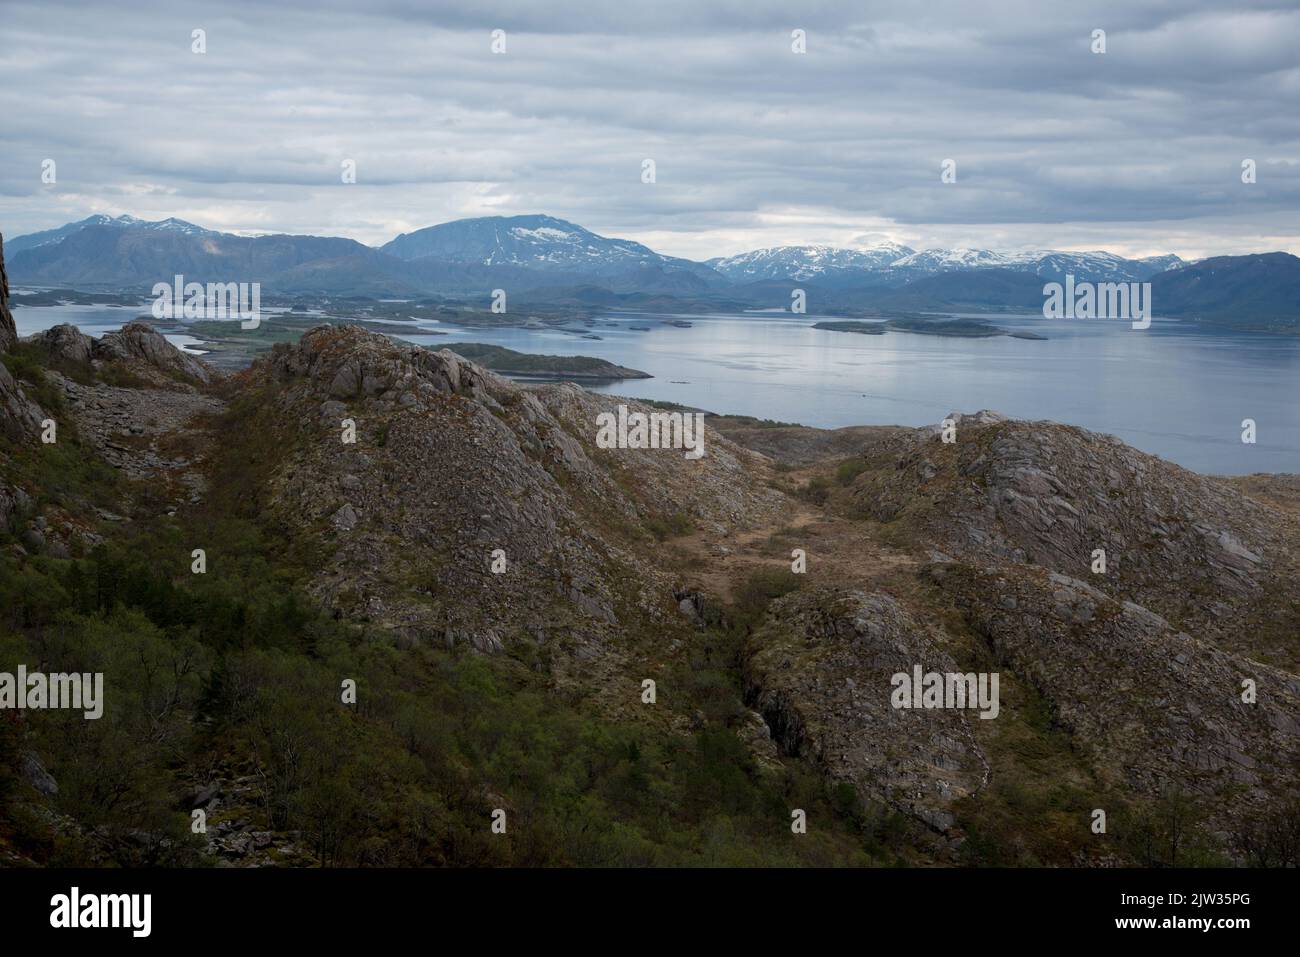 Torghatten is a granite dome in central Norway with great views to the skerries around Brønnøysund. Stock Photo